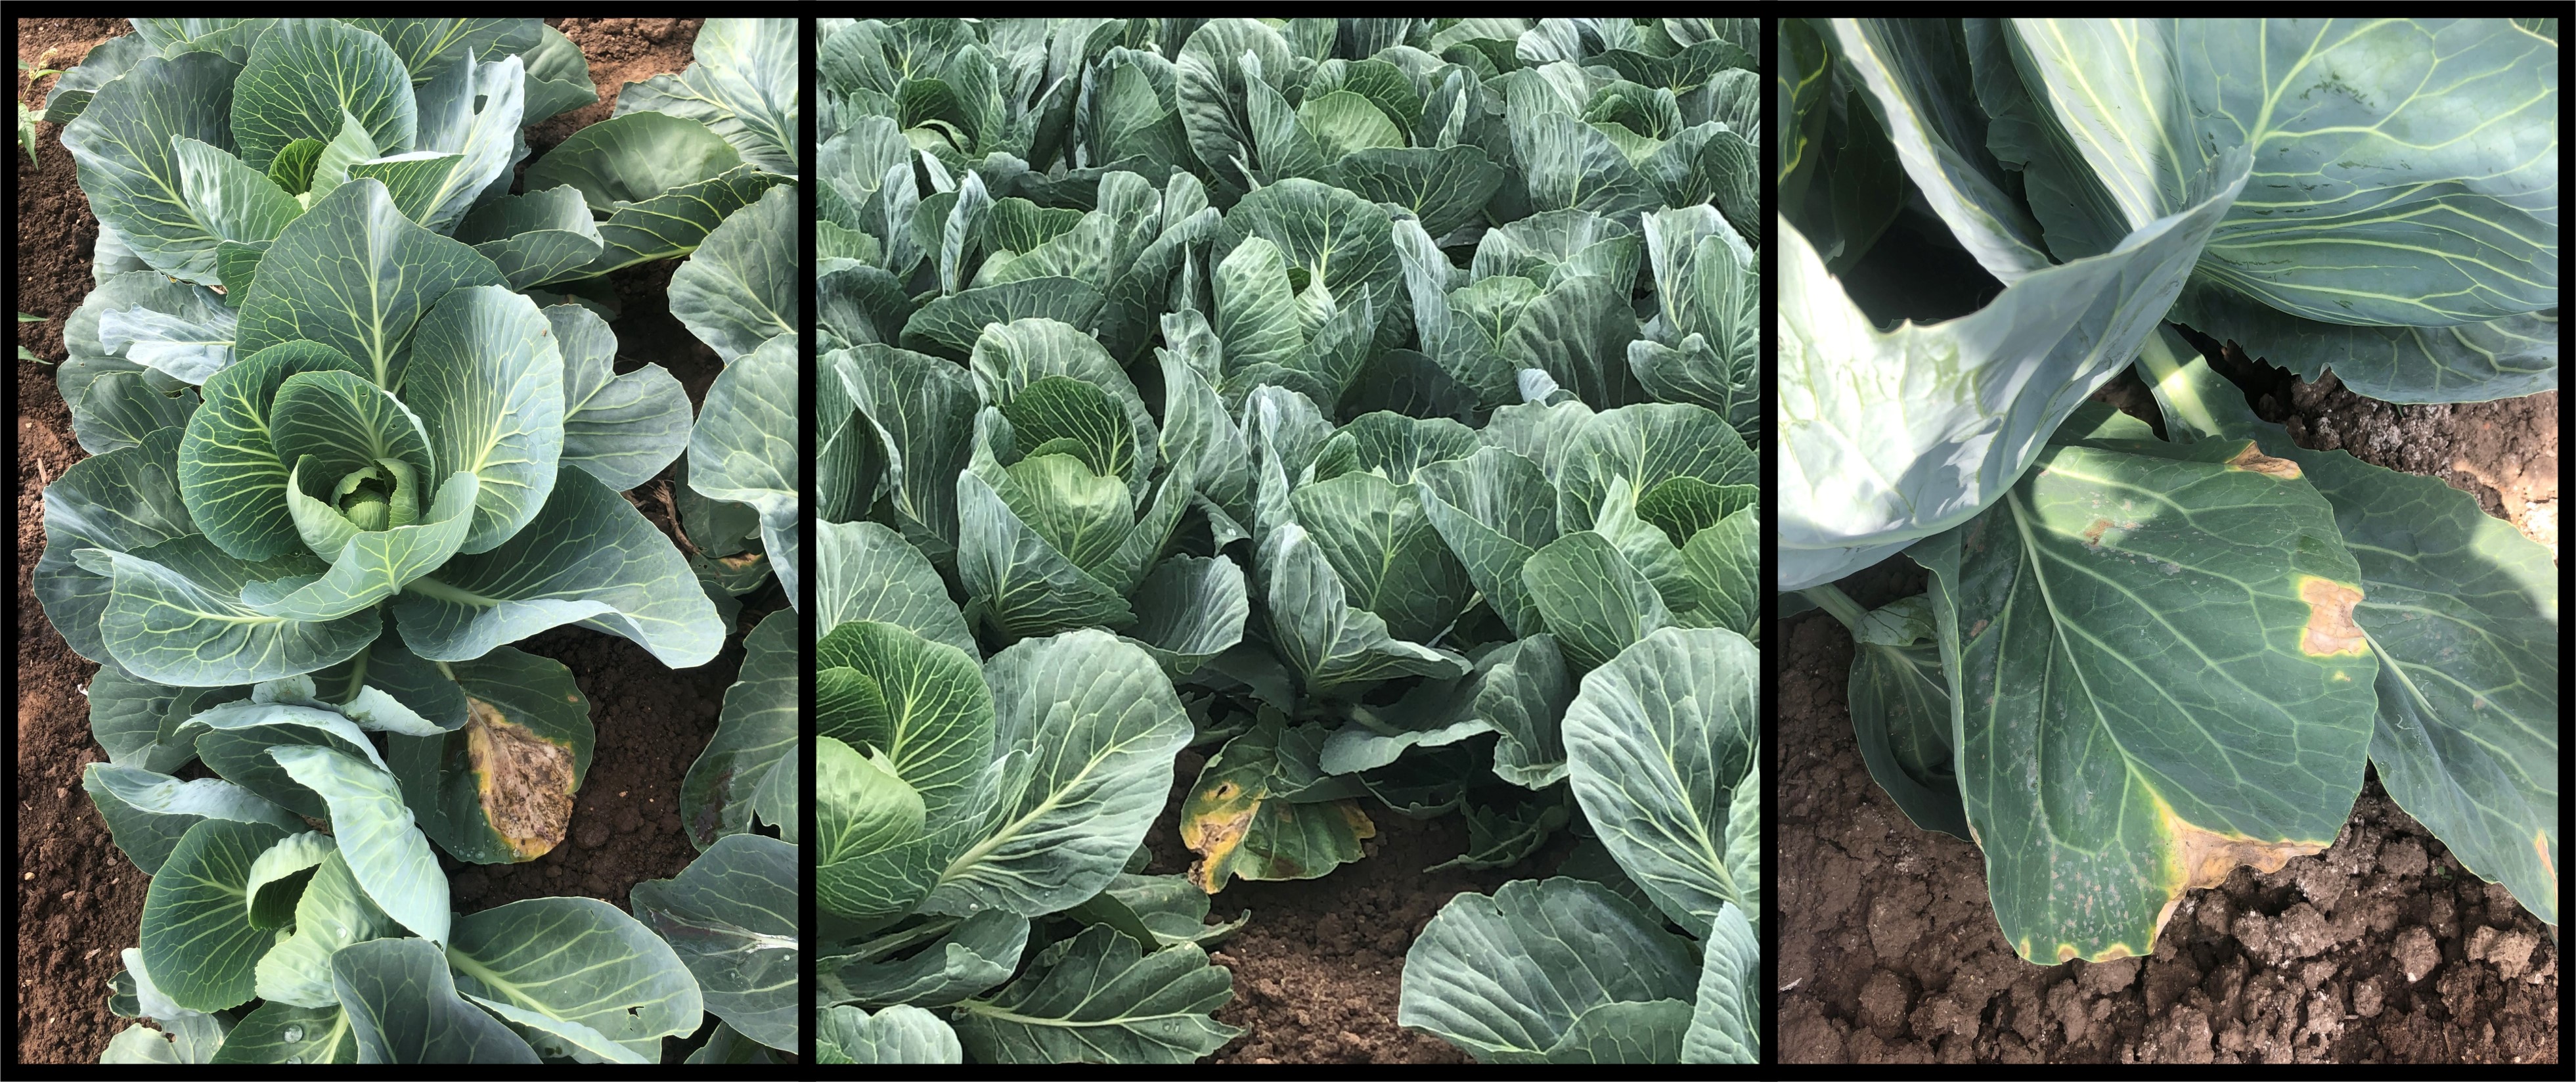 Cabbages with yellow and brown ‘V’-shaped lesions, a classical symptom of black rot